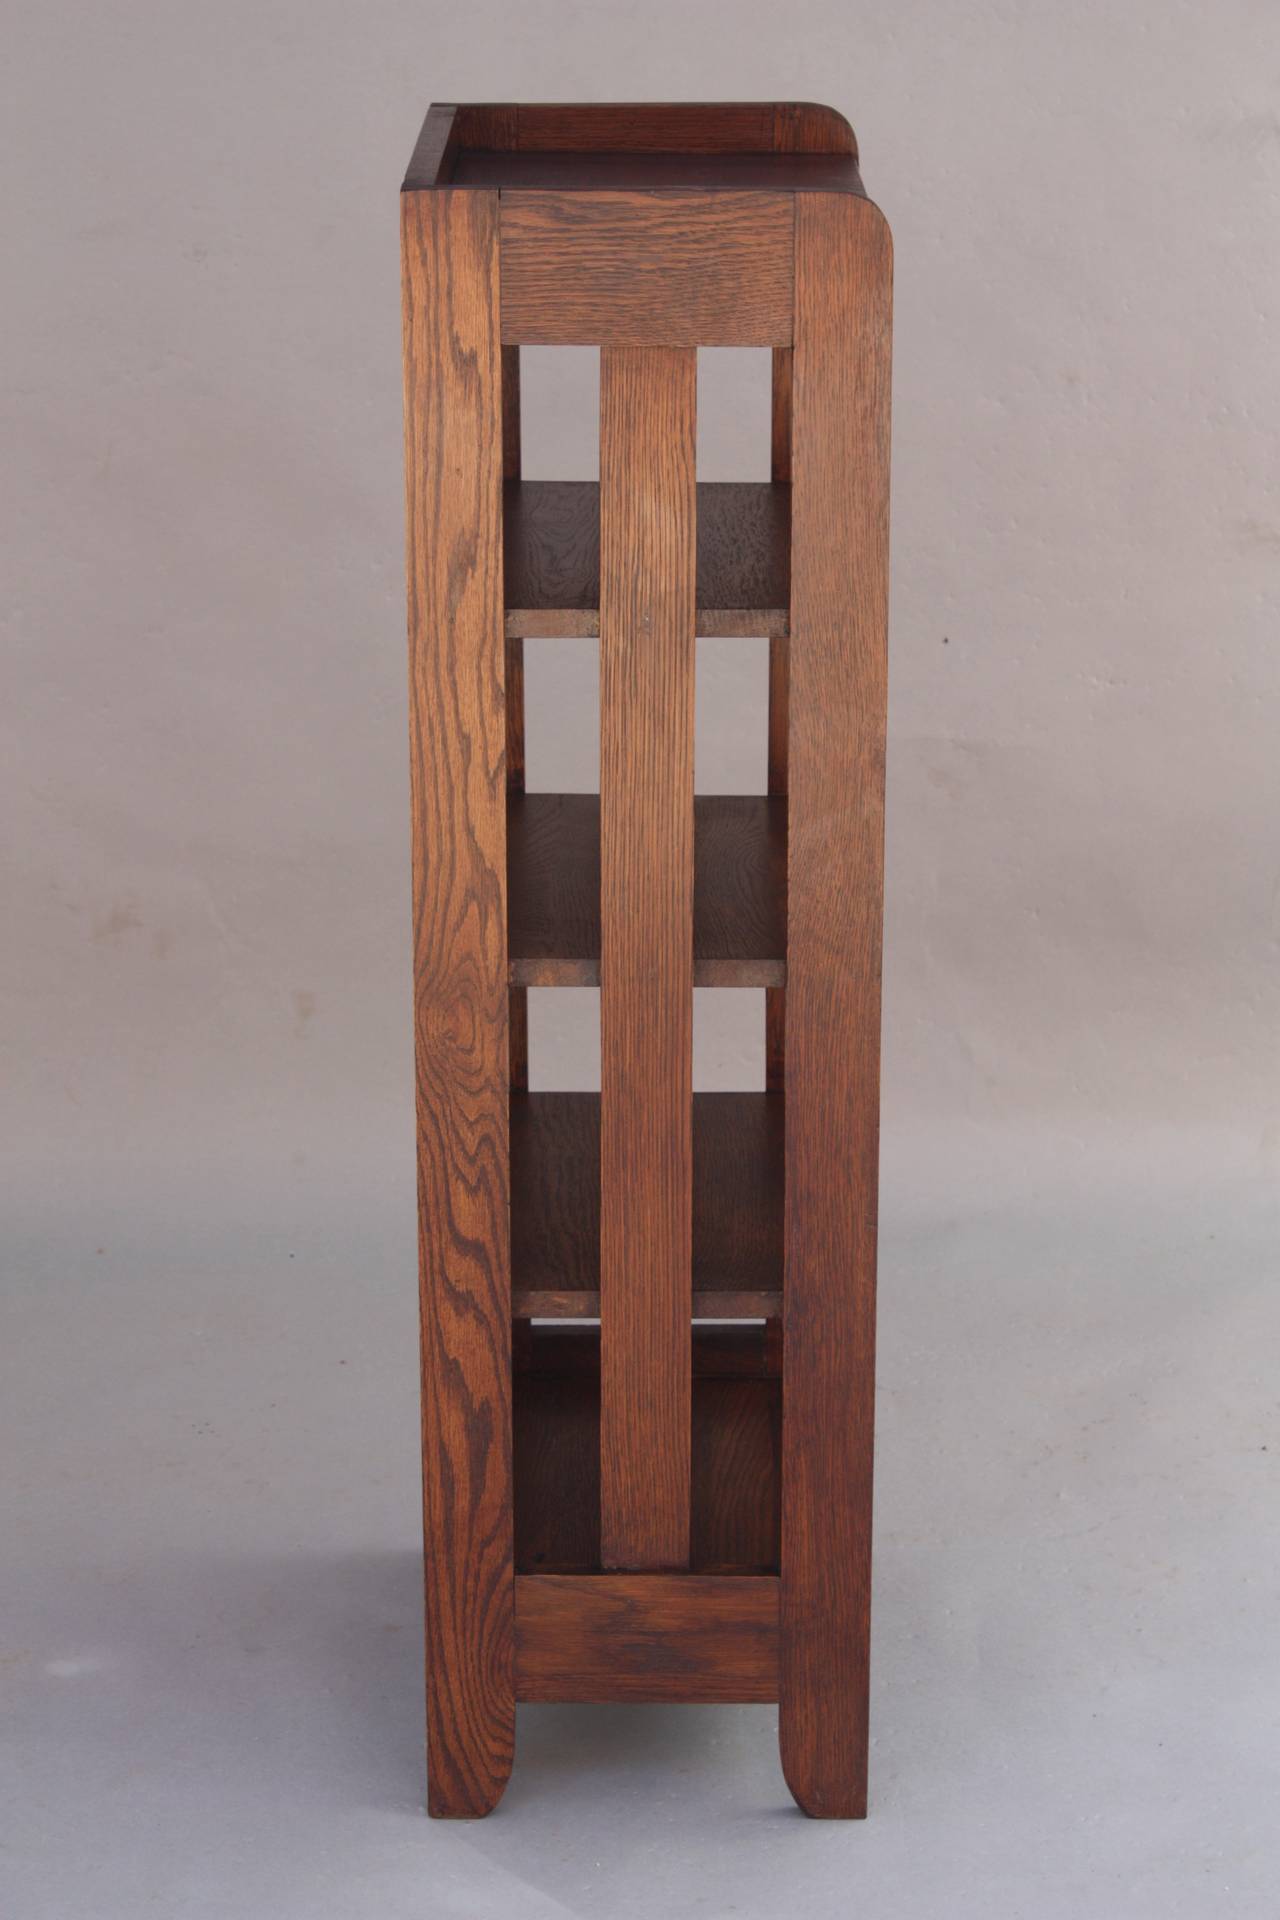 North American Arts & Crafts Tall Magazine Stand or Small Bookcase